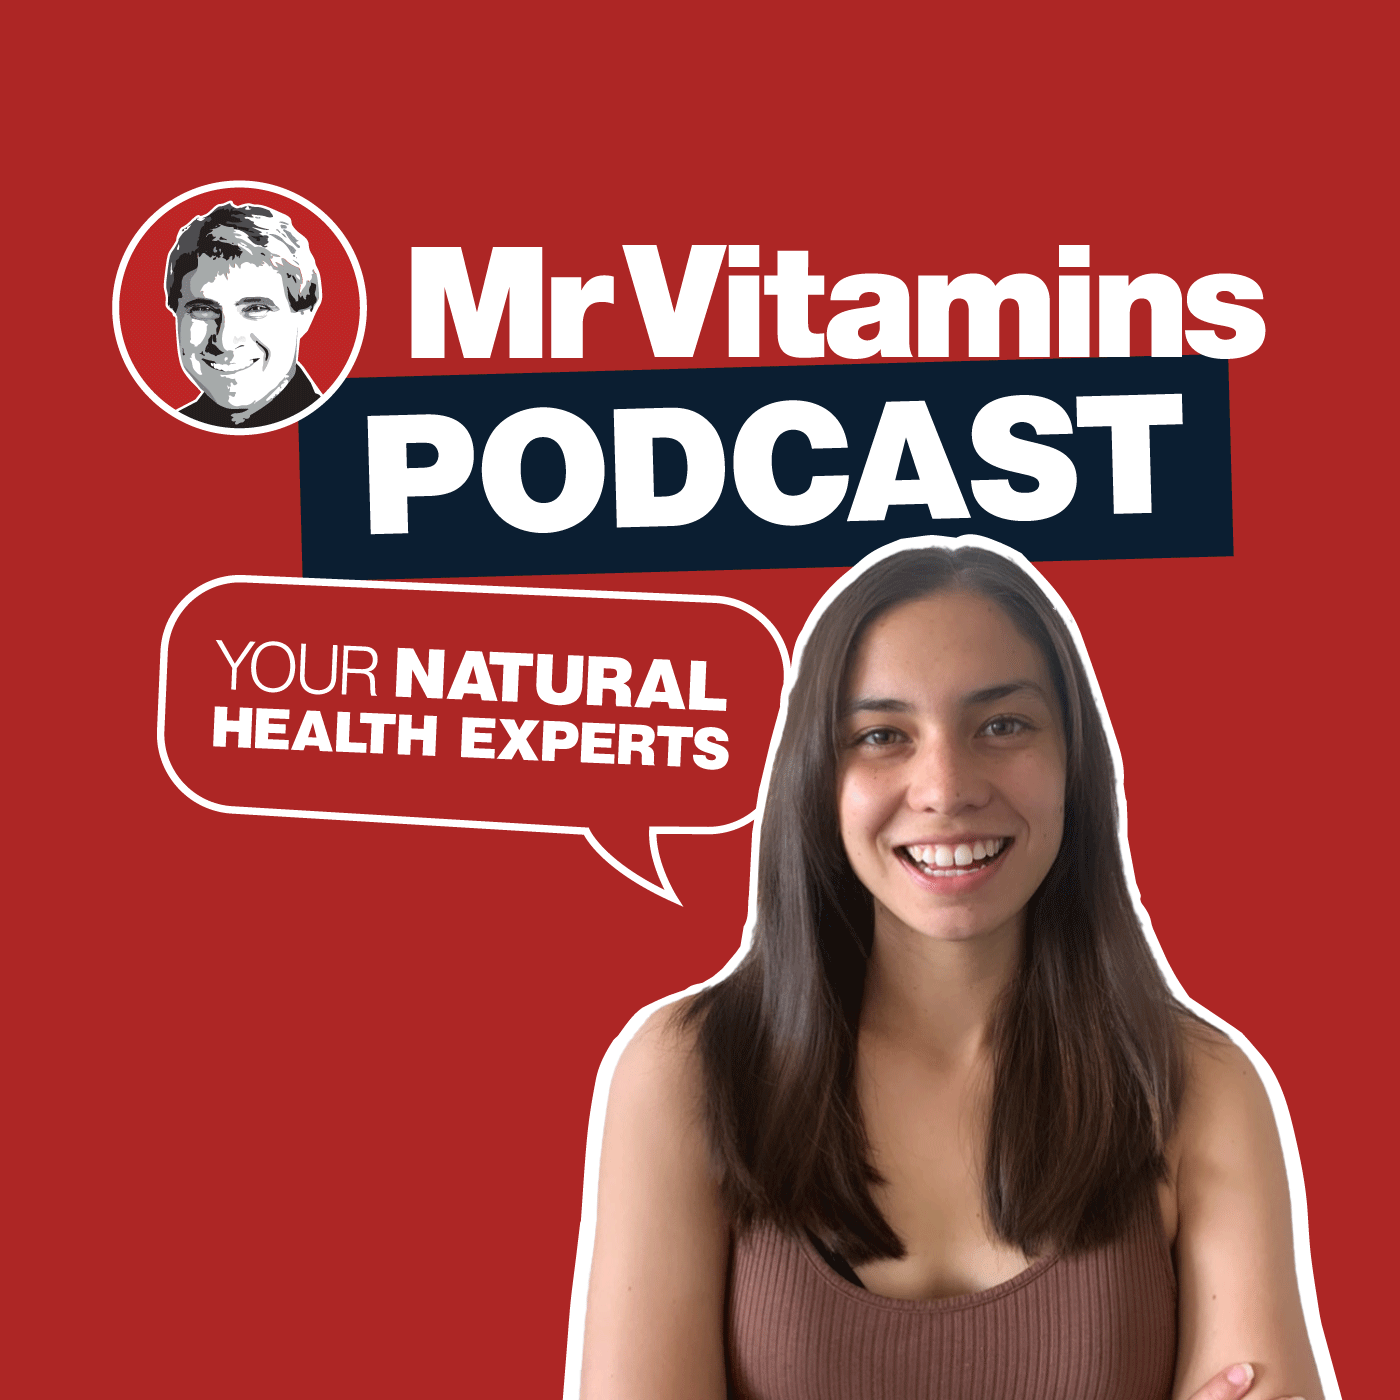 Mr Vitamins Podcast - Keeping Healthy During the Silly Season